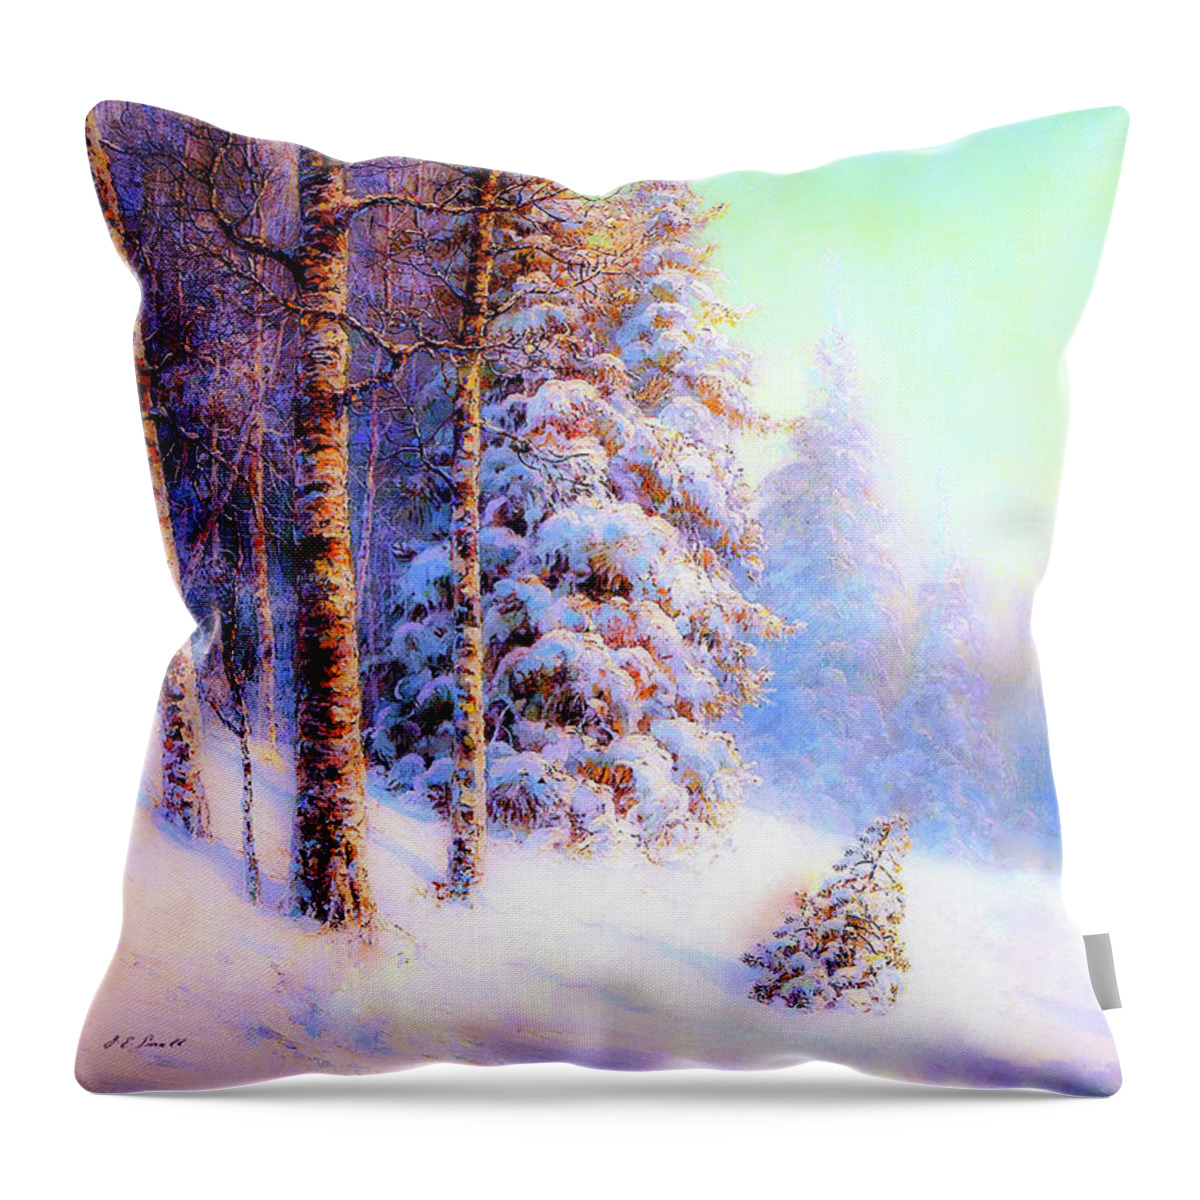 Landscape Throw Pillow featuring the painting Winter Snow Beauty by Jane Small